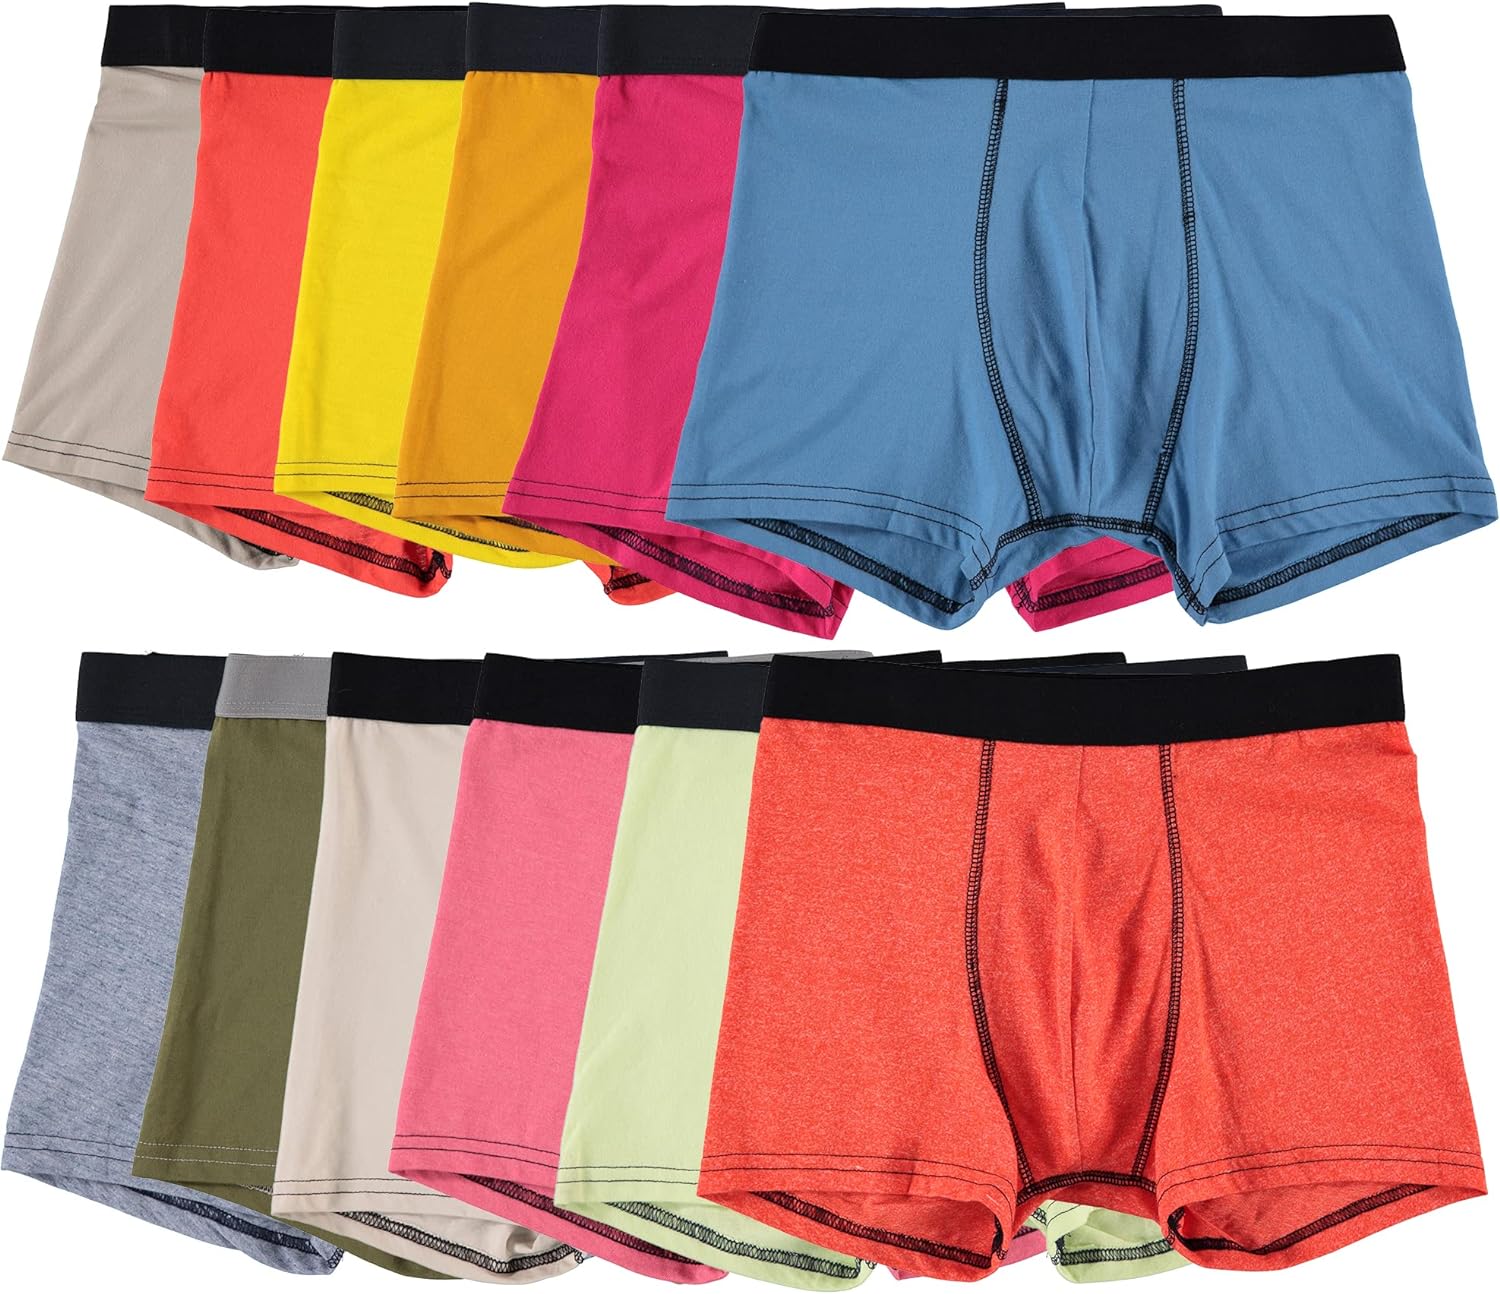 Yacht & Smith 12 Pack of Mens Boxer Briefs Underwear Bulk, 100% Cotton, Soft, Comfortable, Assorted Colorful Brief